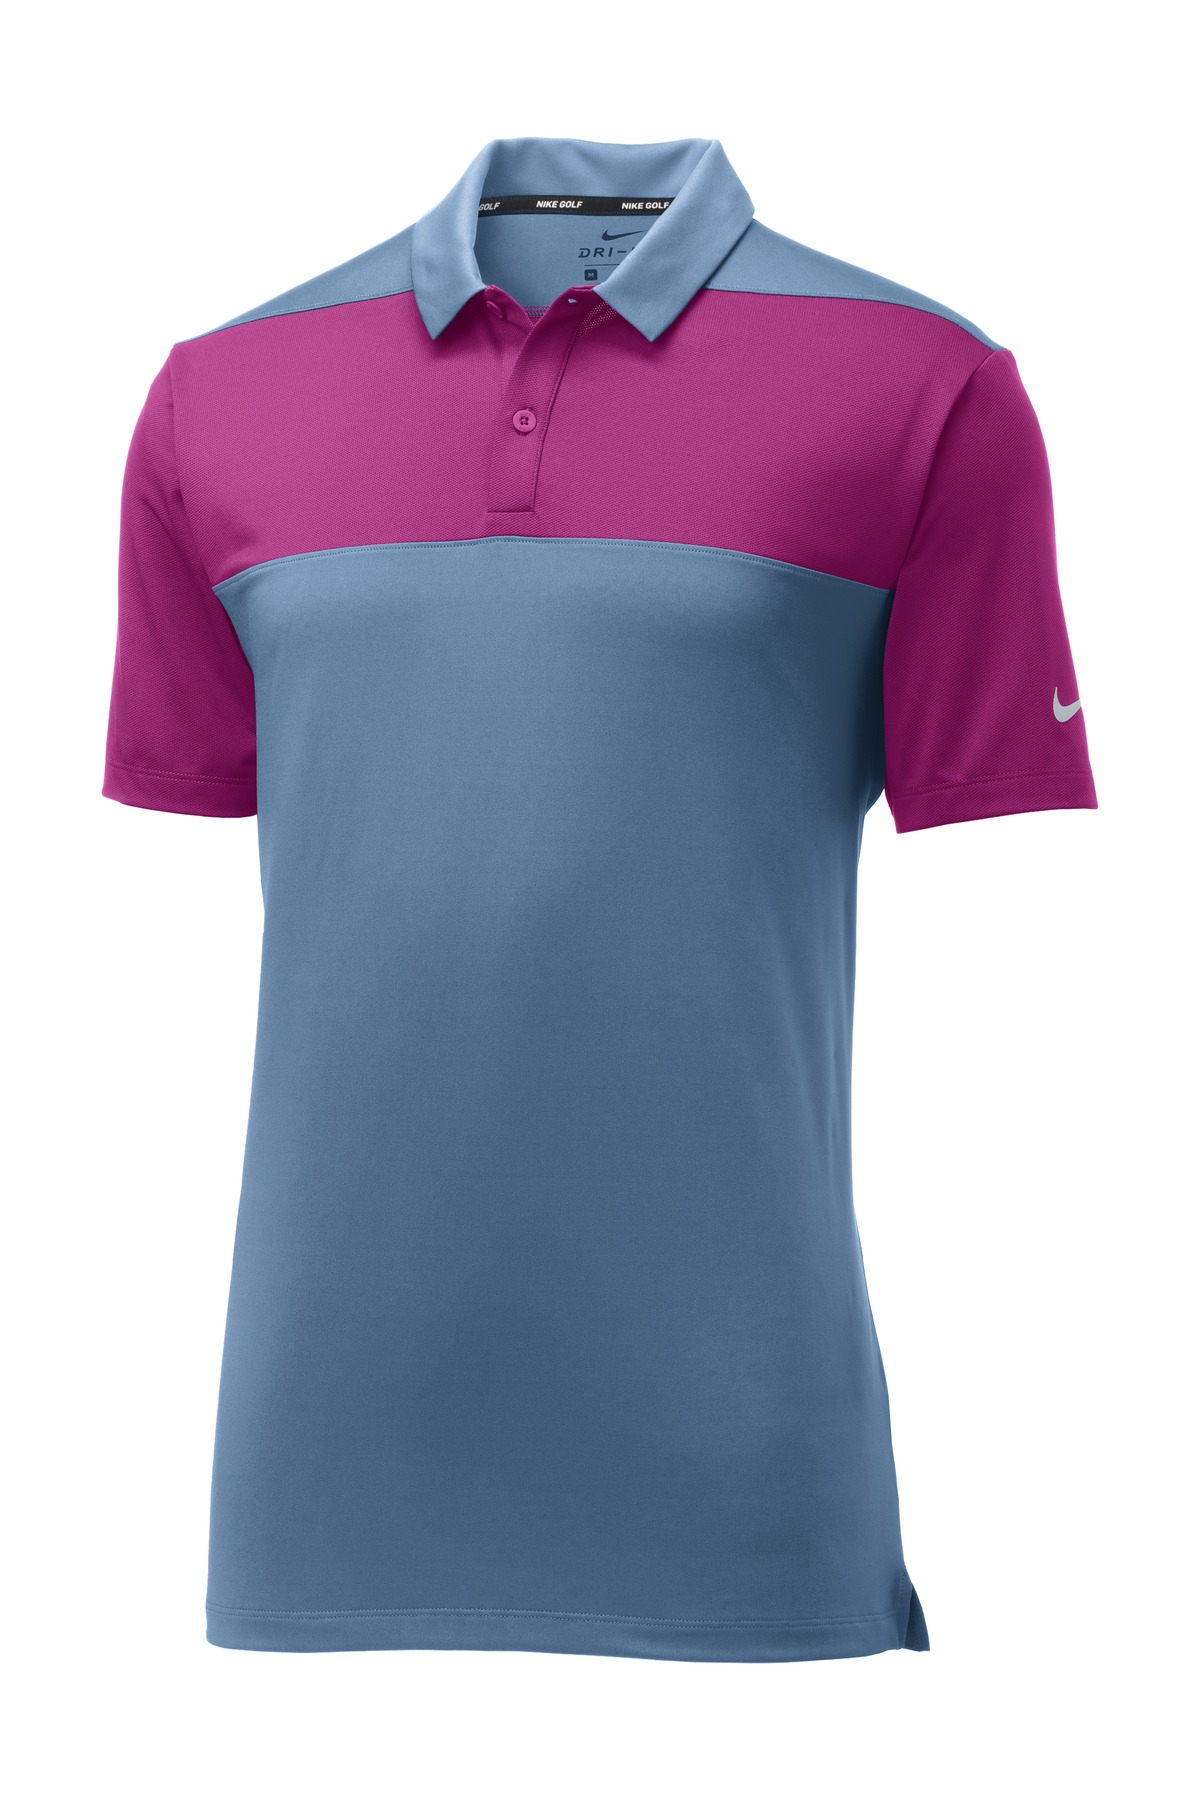 Limited Edition Nike Colorblock Polo 